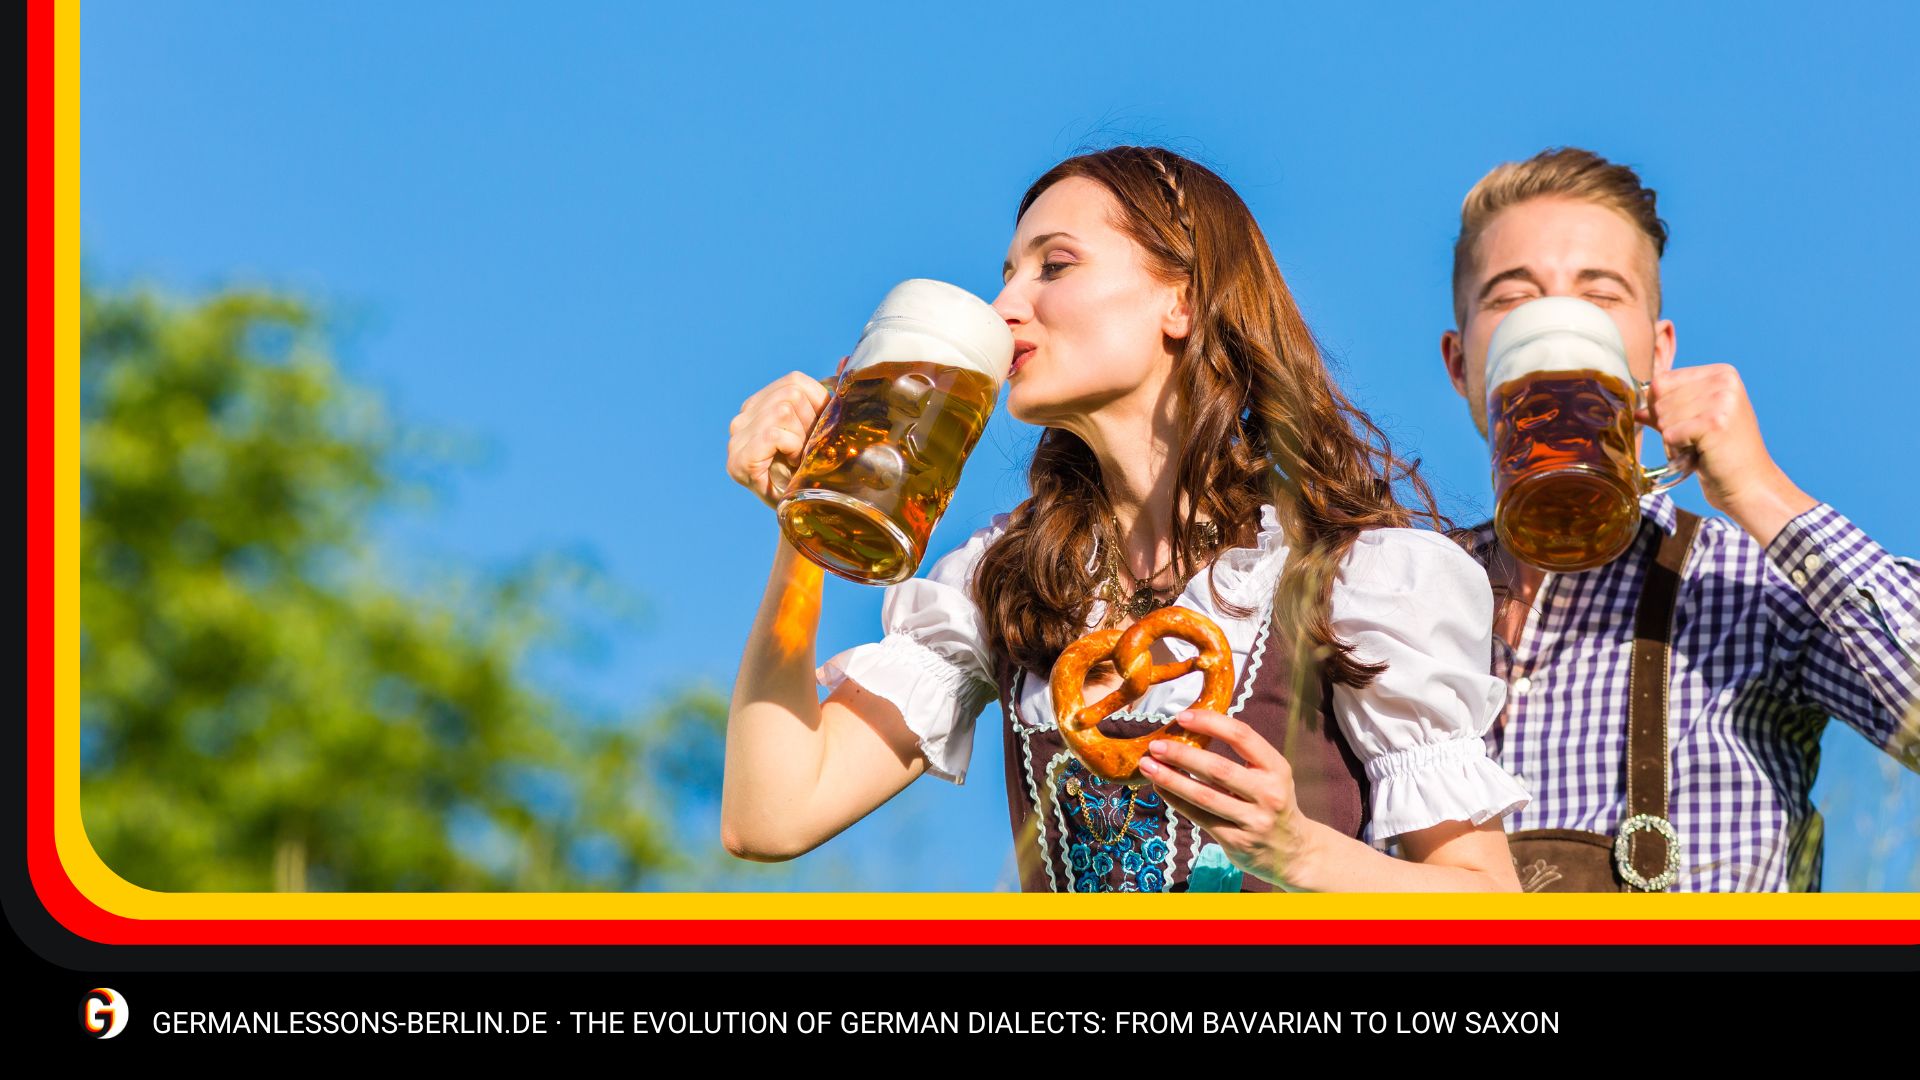 The Evolution of German Dialects: From Bavarian to Low Saxon